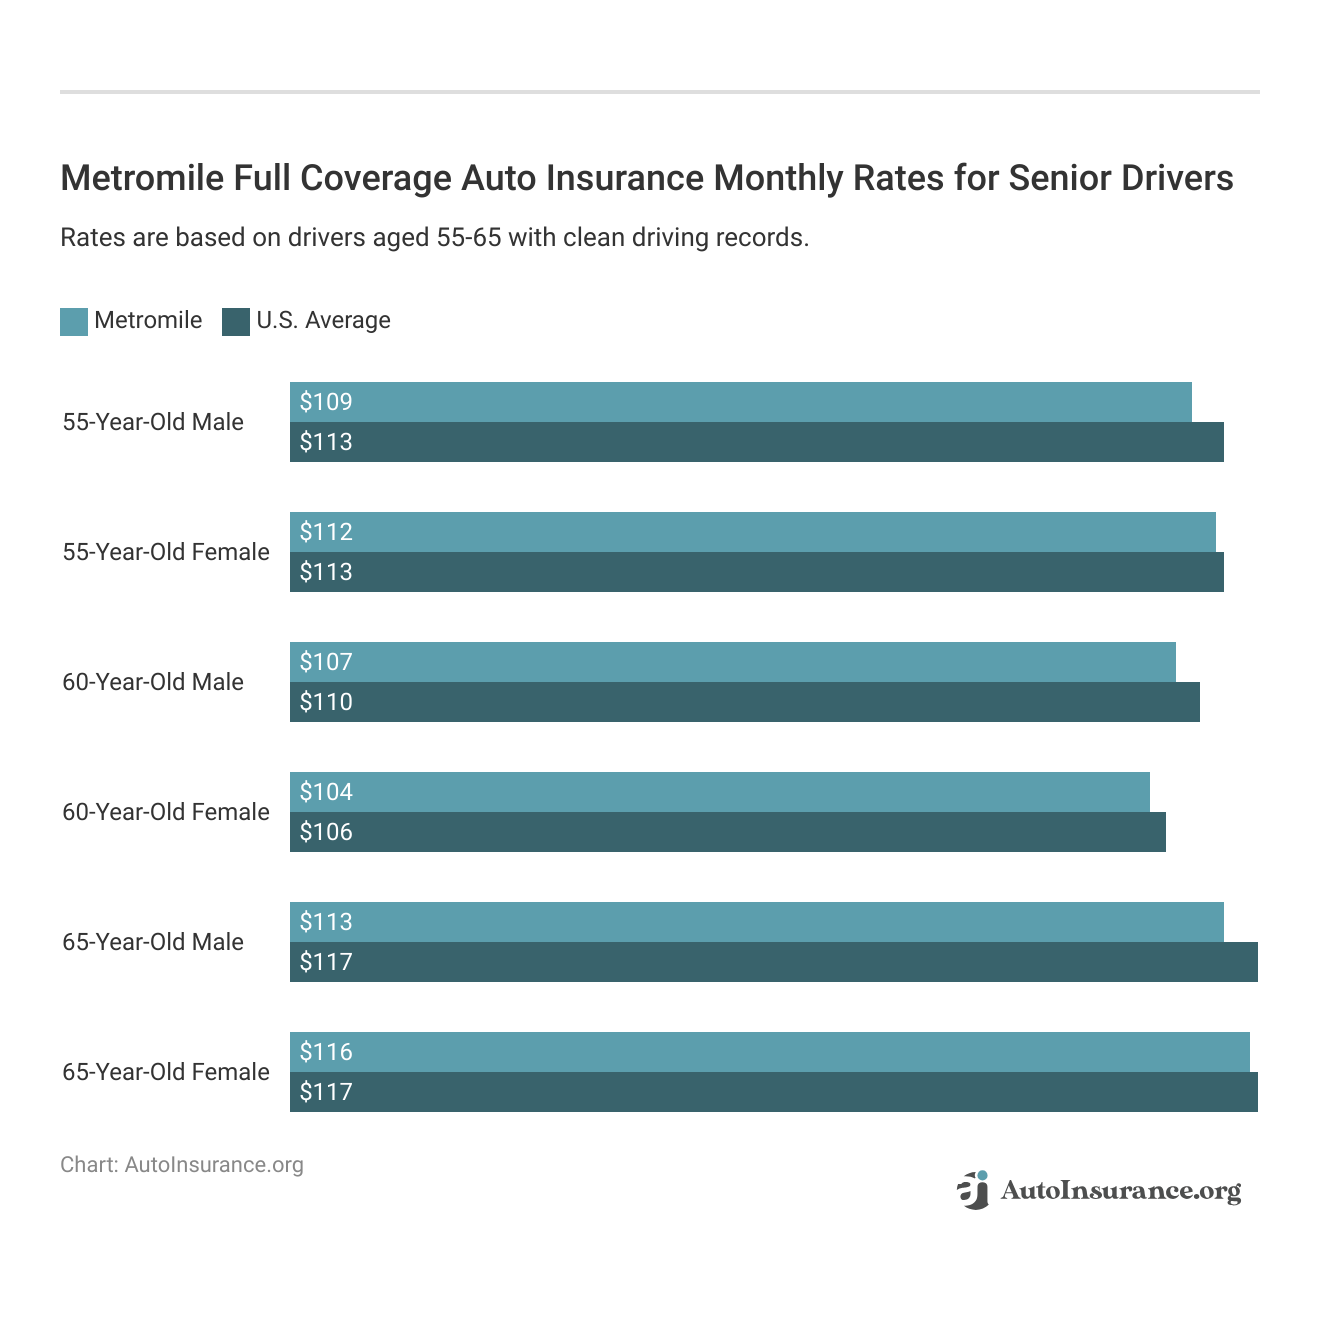 <h3>Metromile Full Coverage Auto Insurance Monthly Rates for Senior Drivers</h3>